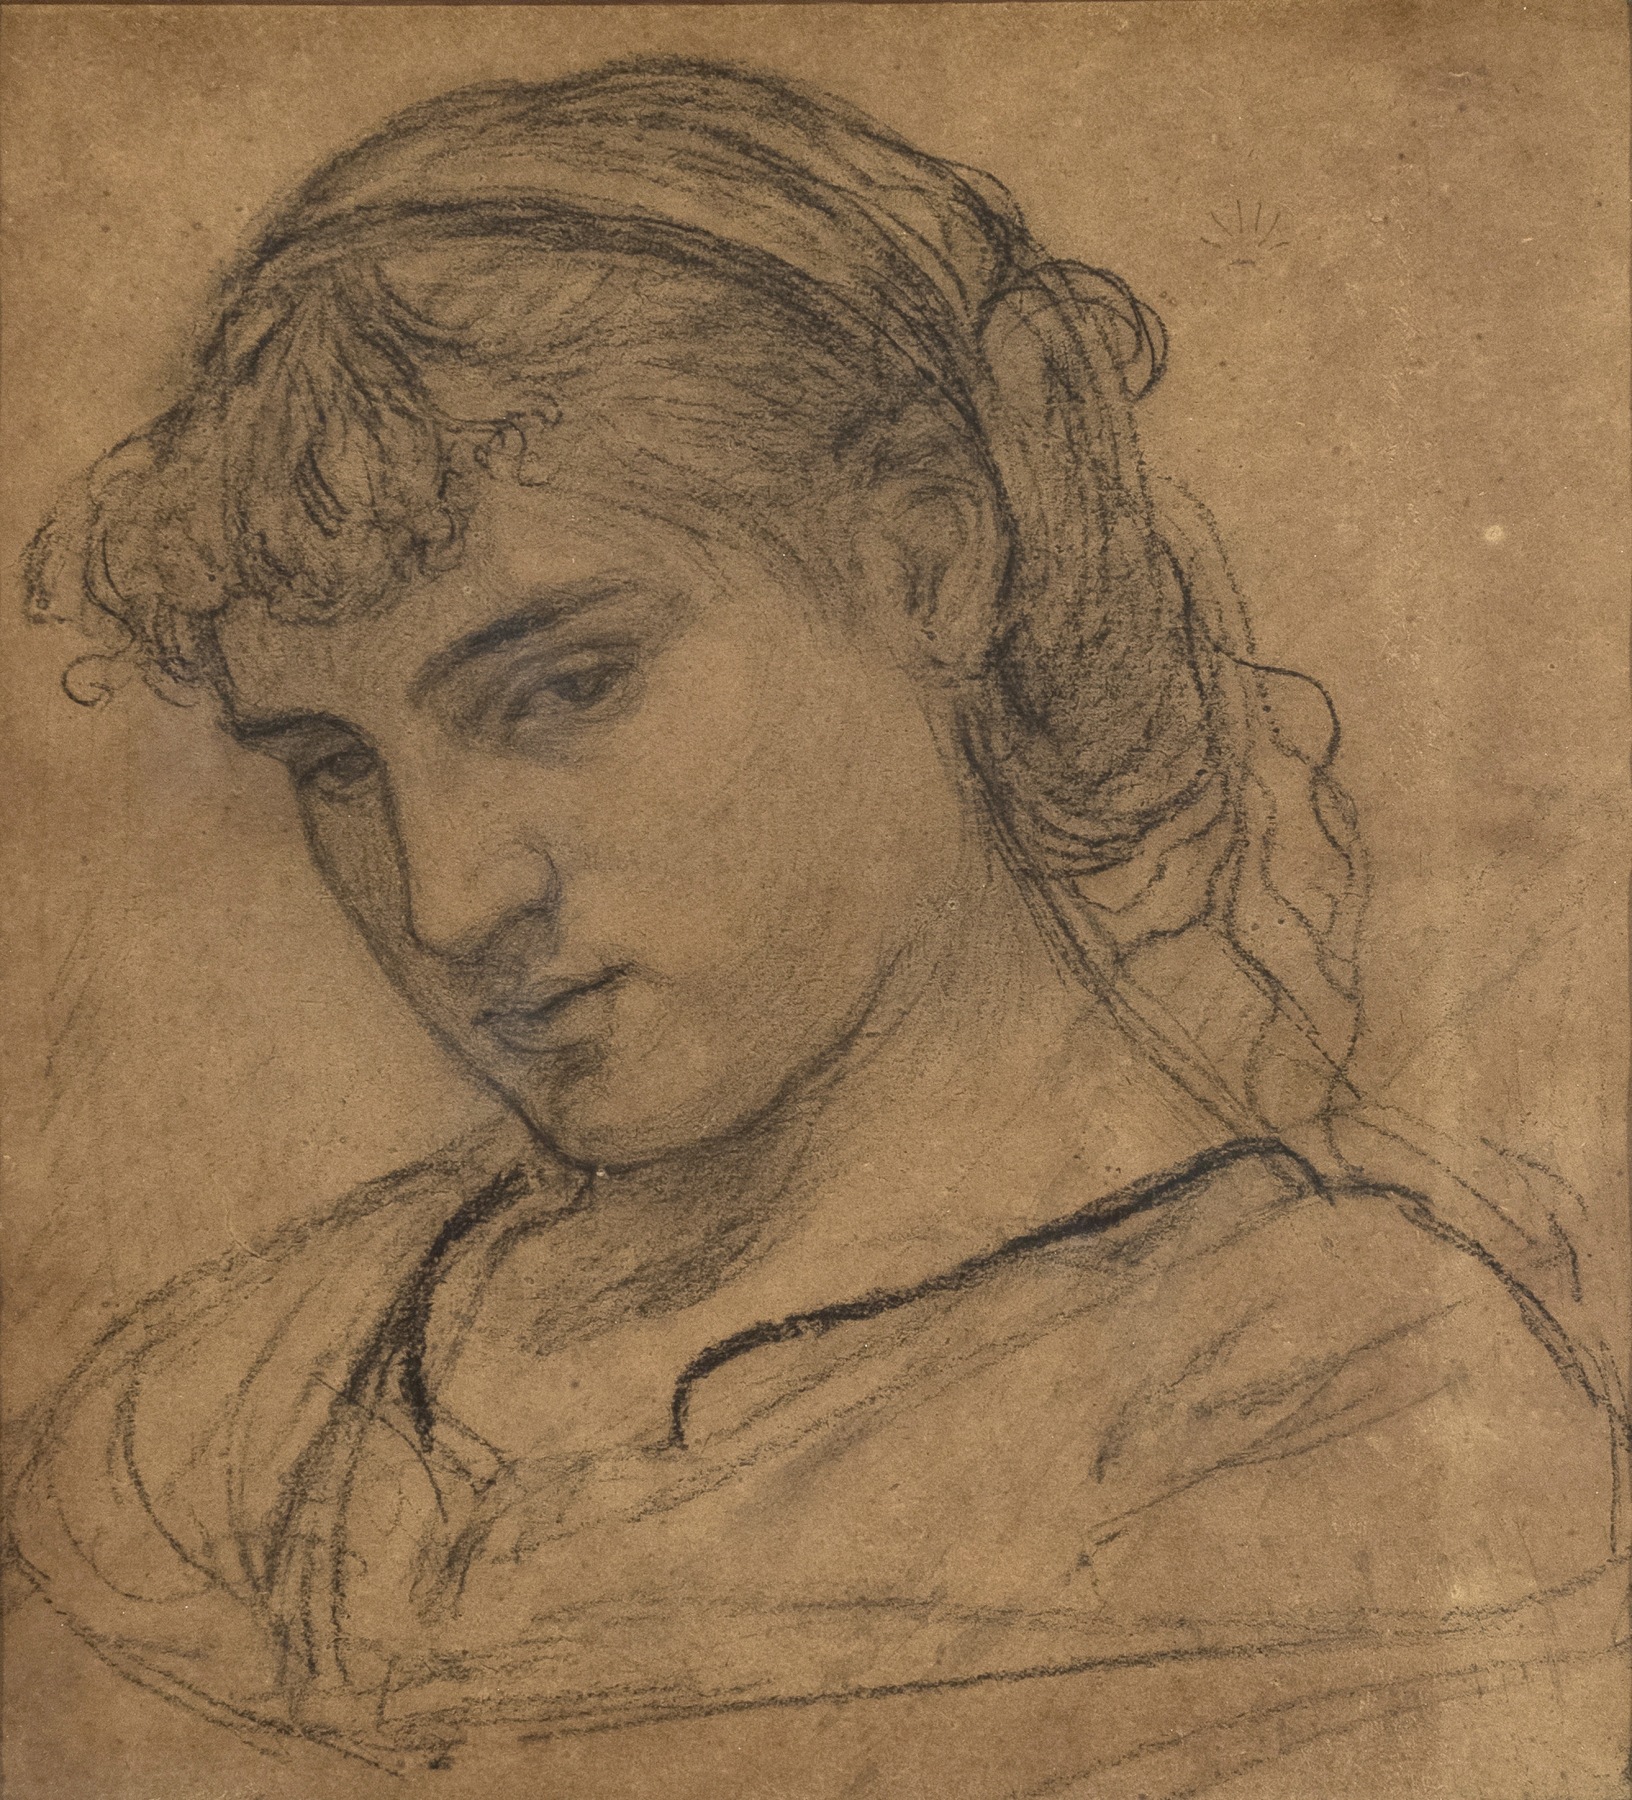 Albert Joseph Moore, Portrait of a Girl, Charcoal on brown paper 13 1/2 x 14 1/2 inches